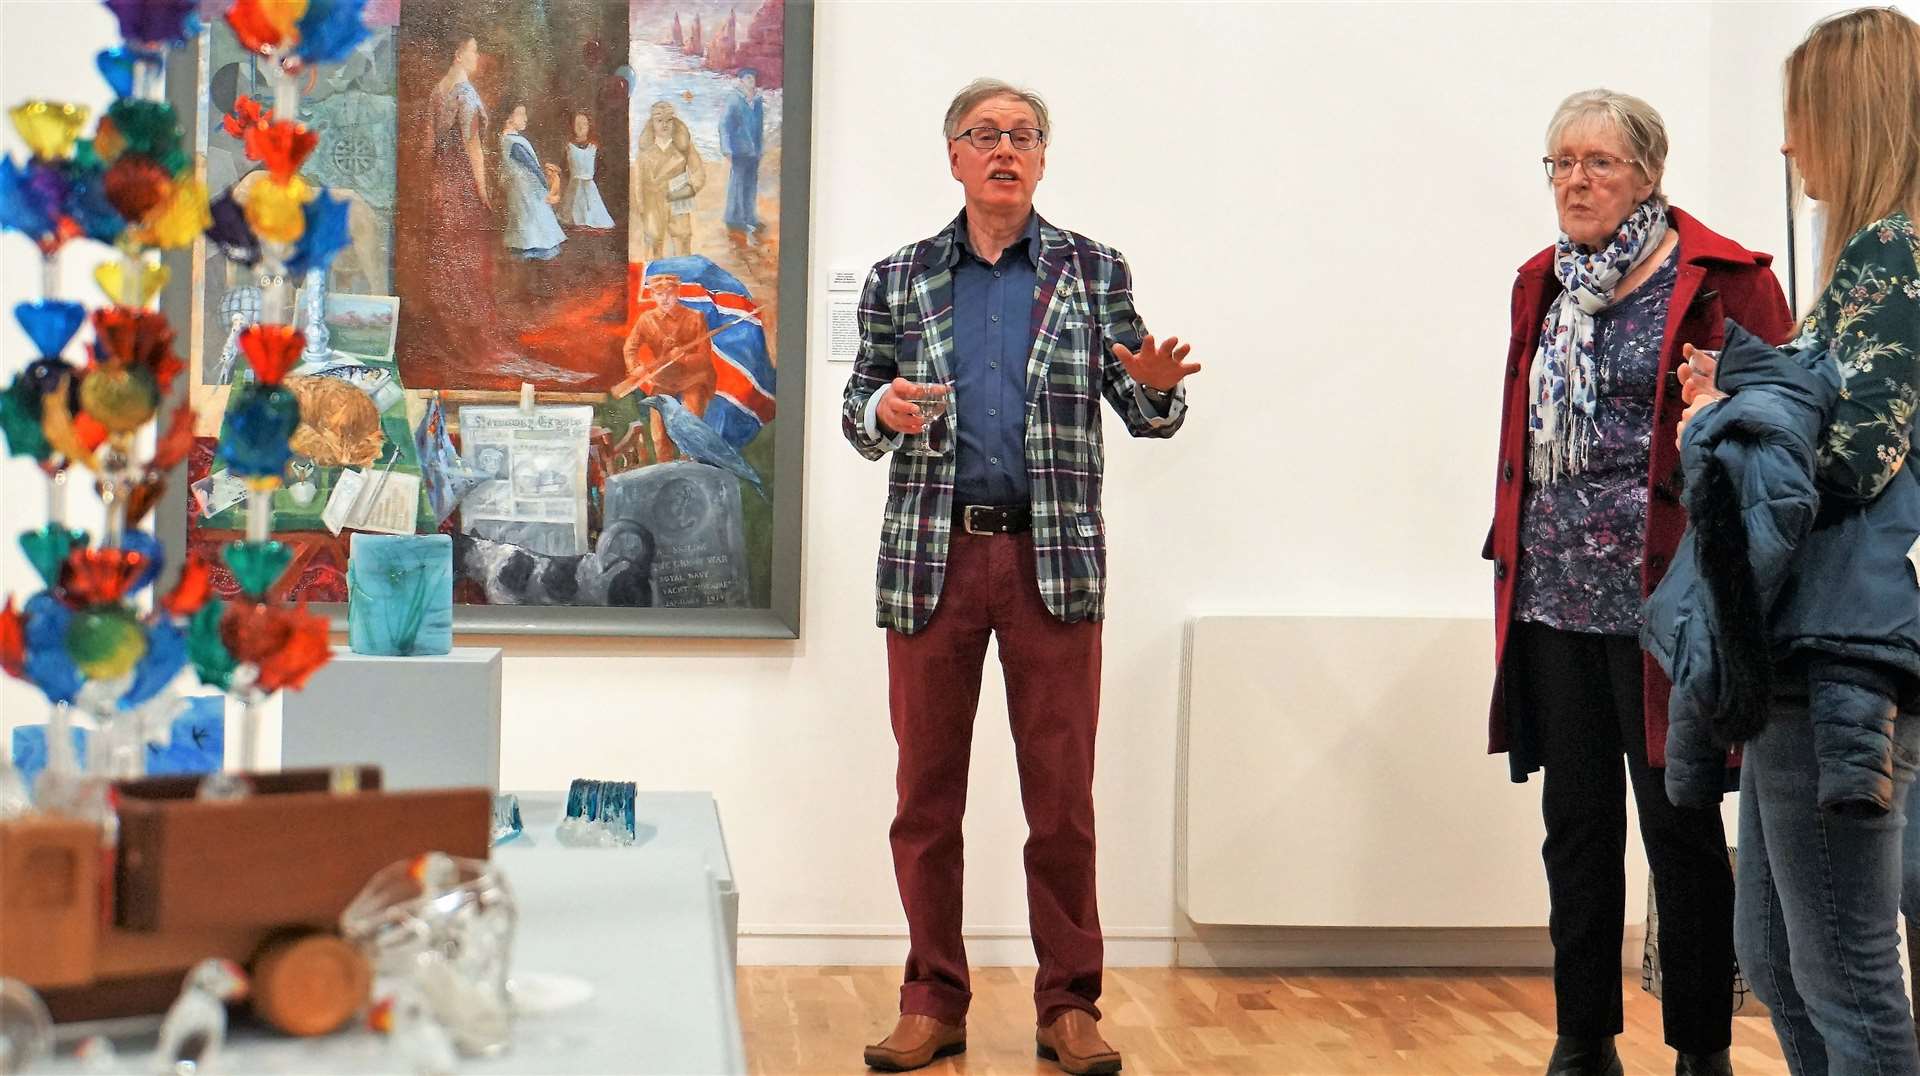 Ian Pearson, chairman of the Society of Caithness Artists, introduced a show at the Thurso Art Gallery in March 2019. Photo: DGS